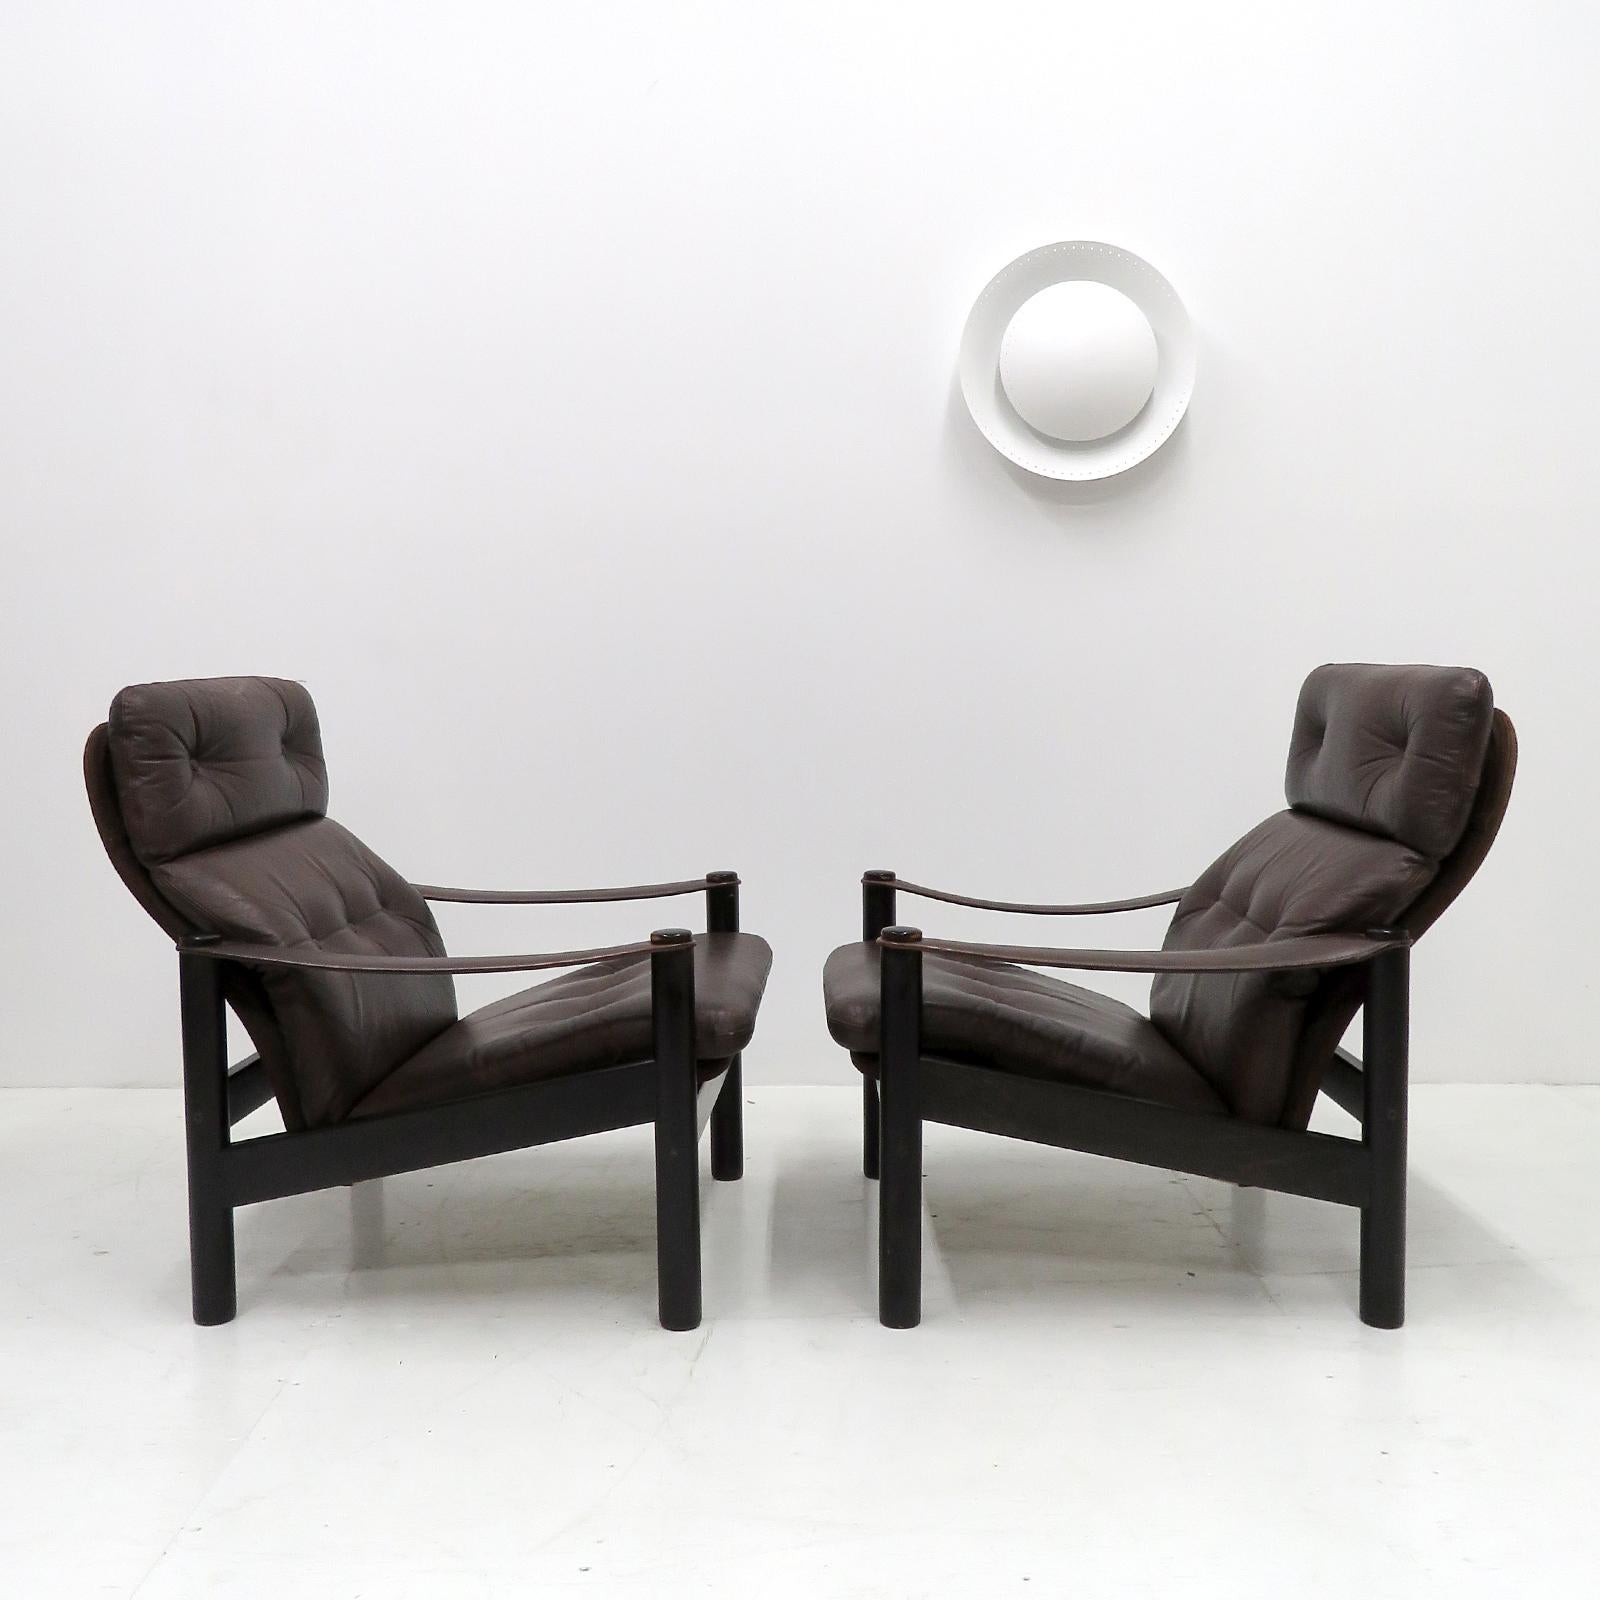 Danish Leather Lounge Chairs by Ebbe Gehl & Søren Nissen, 1970 For Sale 2